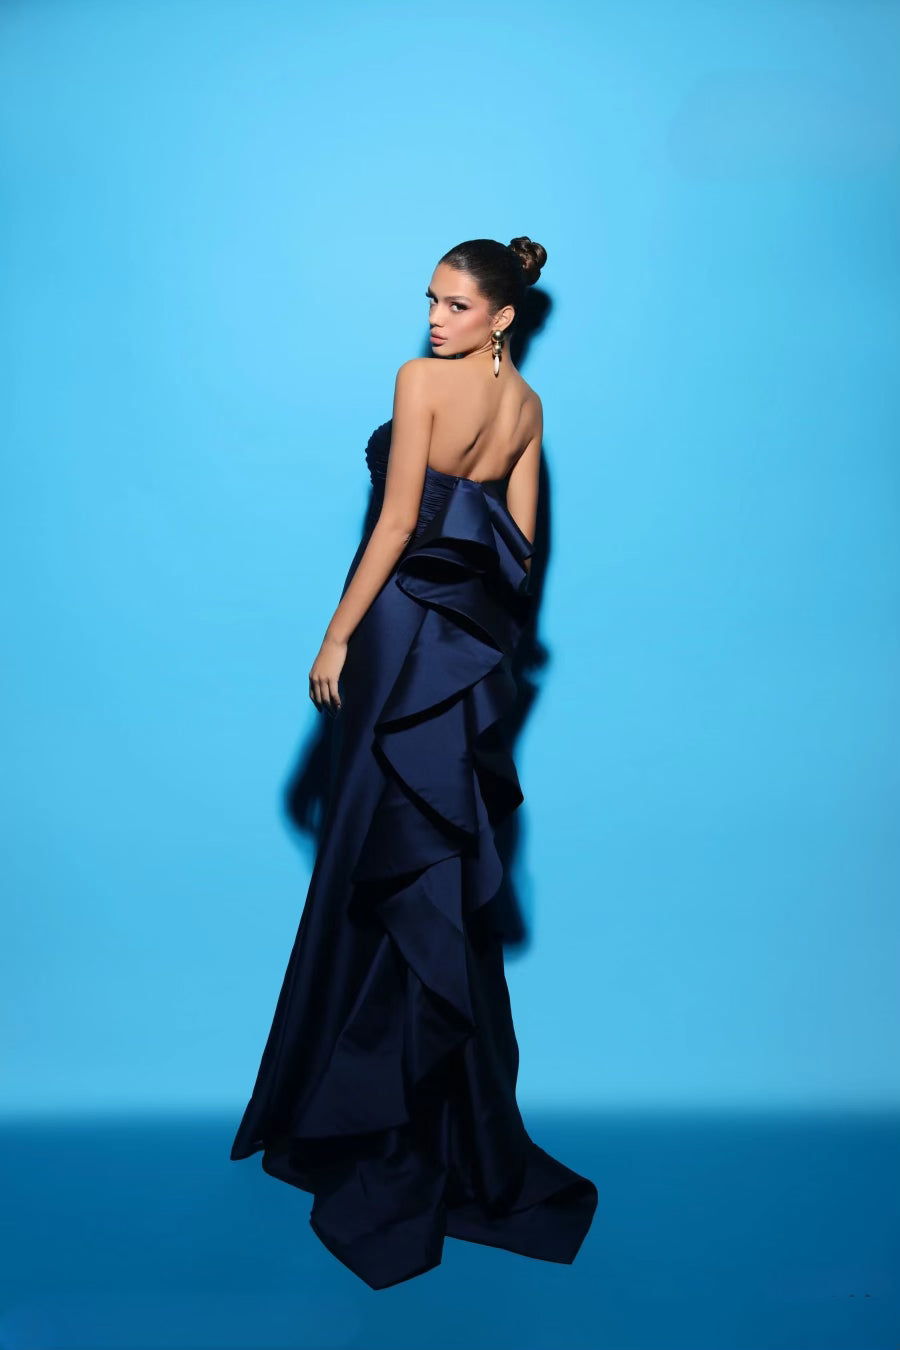 Tarik Ediz 98441 Elegant Strapless Sheath Evening Dress - A timeless strapless evening dress with a straight neckline, sheath silhouette, front slit, and a modern back ruffle detail. Make a statement with elegance and contemporary flair.  The model is wearing the dress in the color royal blue.  This is a view of the back of the dress..